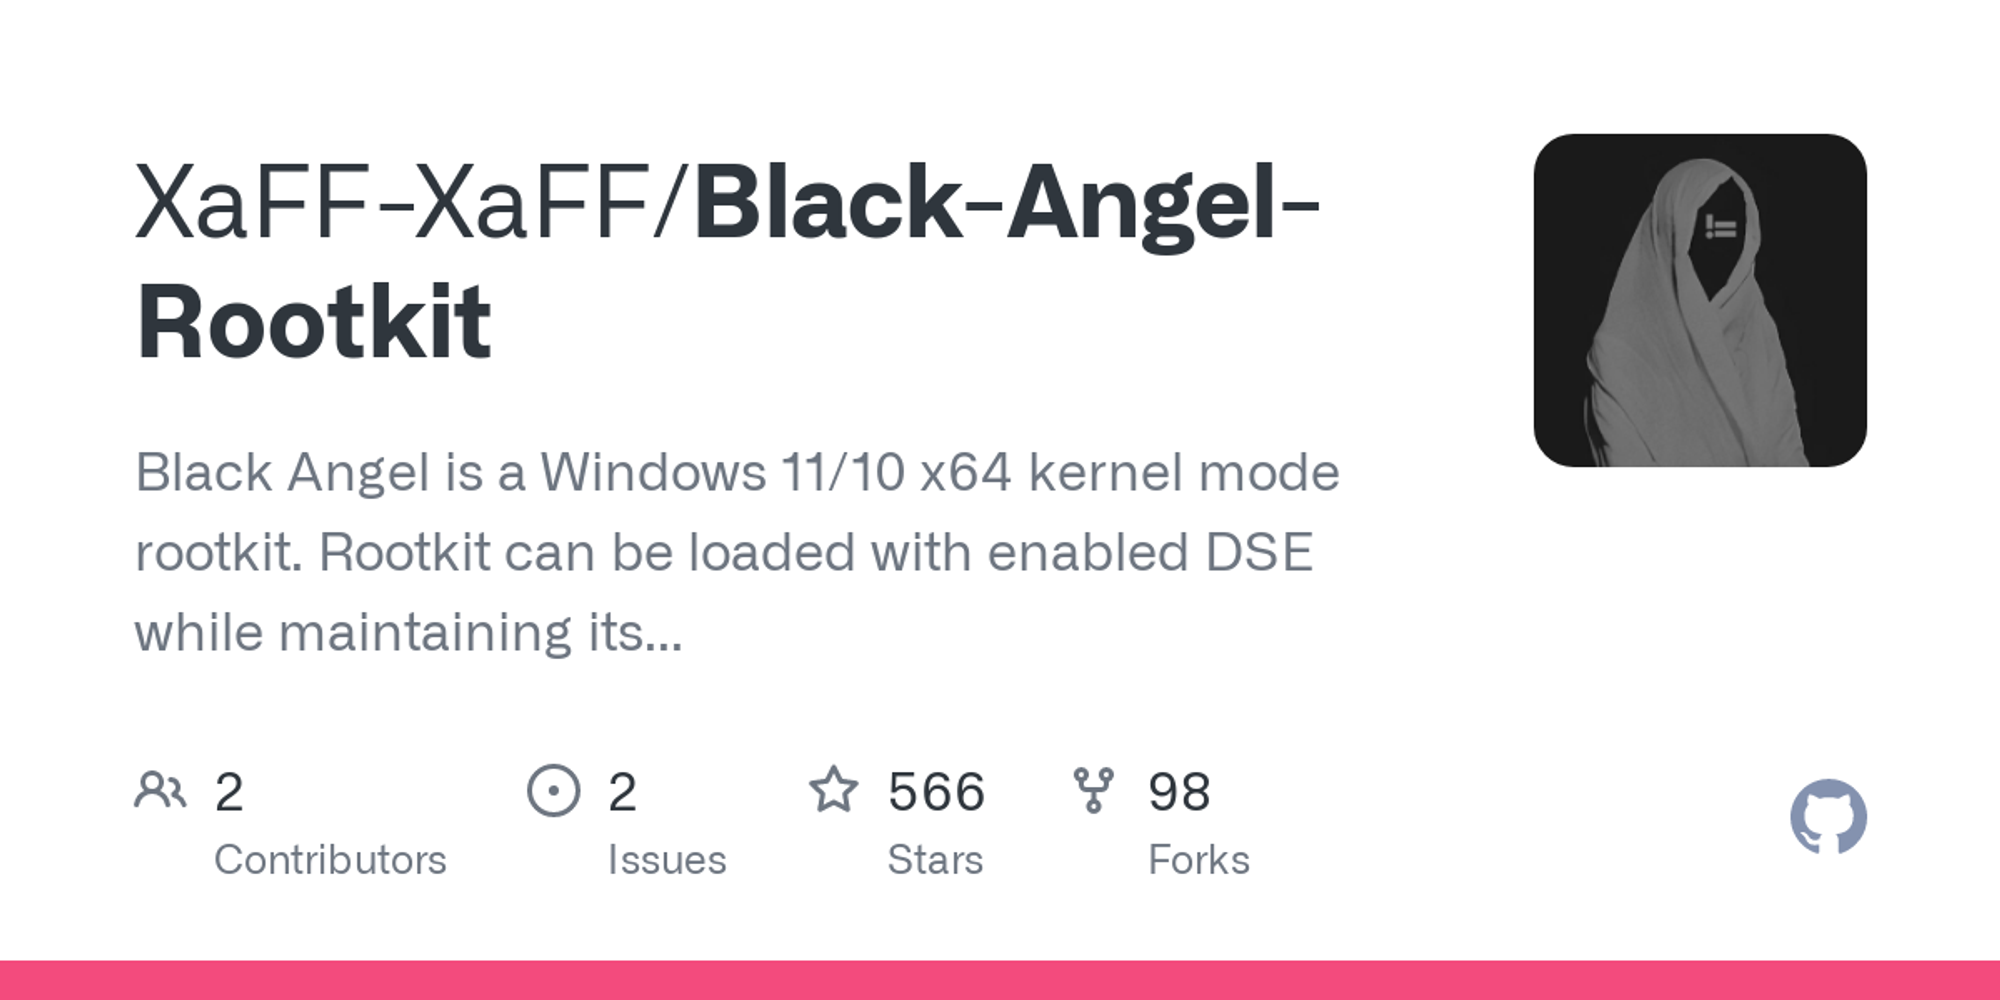 GitHub - XaFF-XaFF/Black-Angel-Rootkit: Black Angel is a Windows 11/10 x64 kernel mode rootkit. Rootkit can be loaded with enabled DSE while maintaining its full functionality.